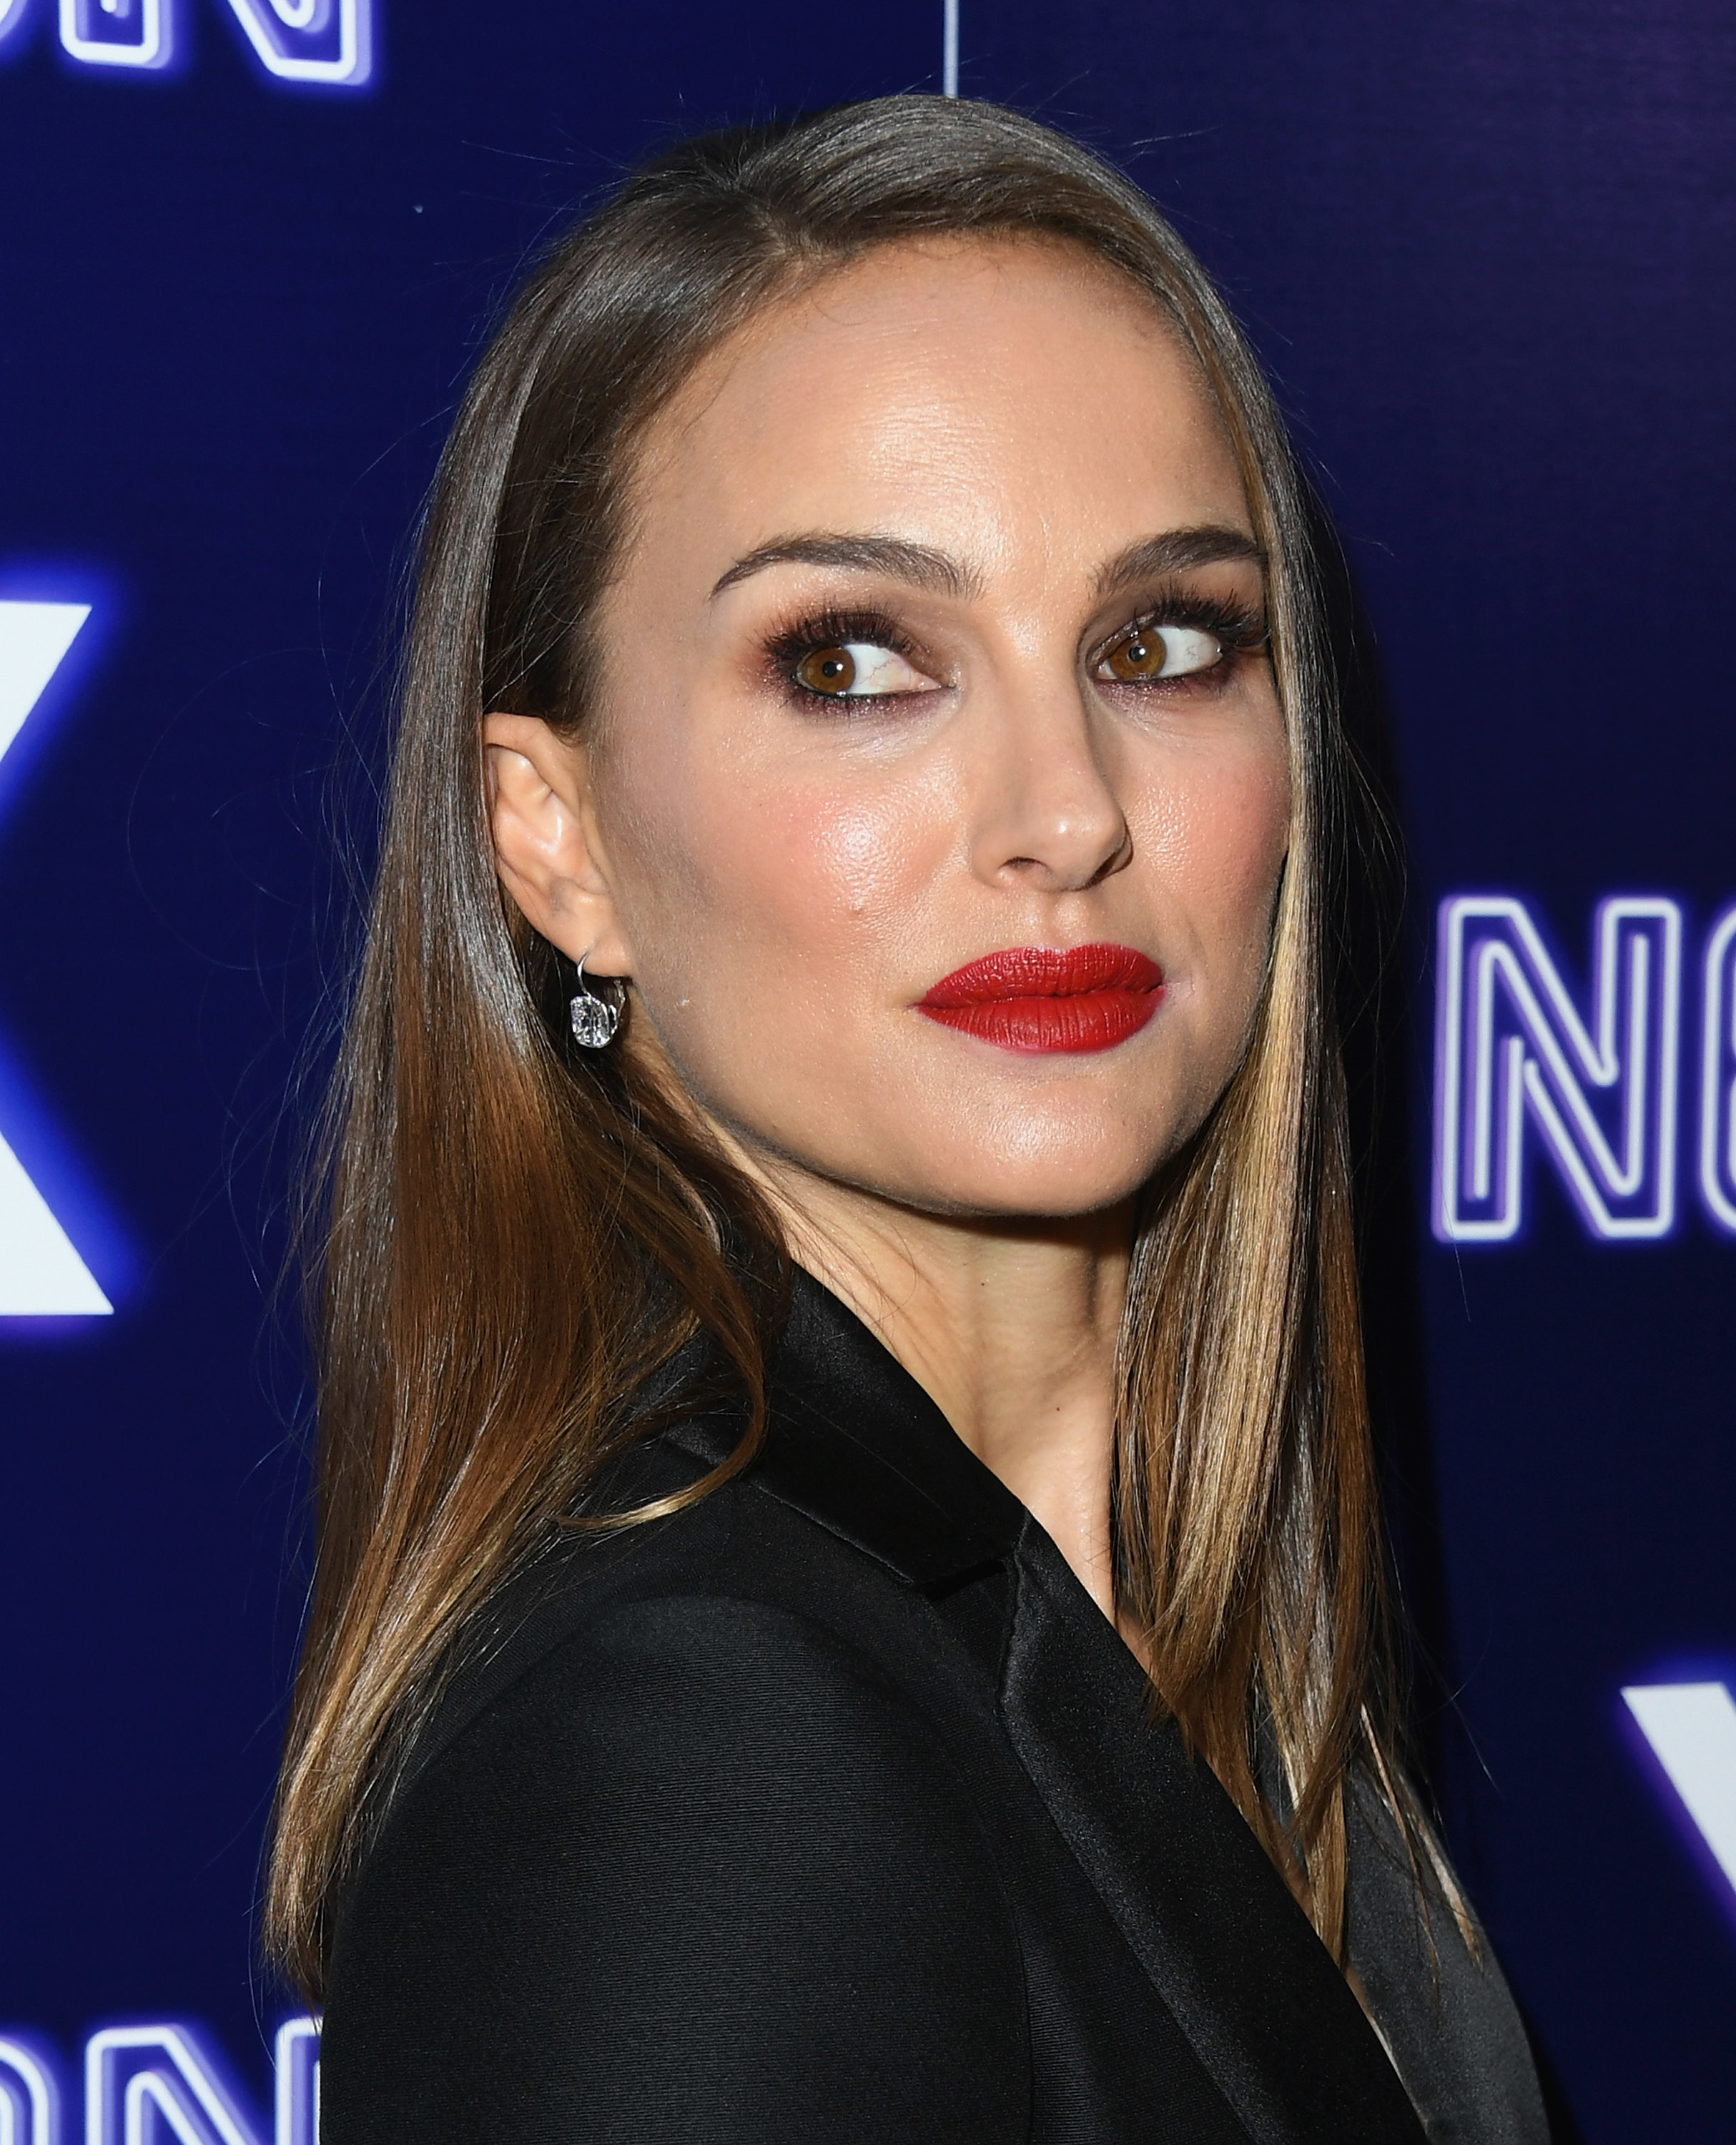 Natalie Portman in a sleek black outfit with straight hair at an event